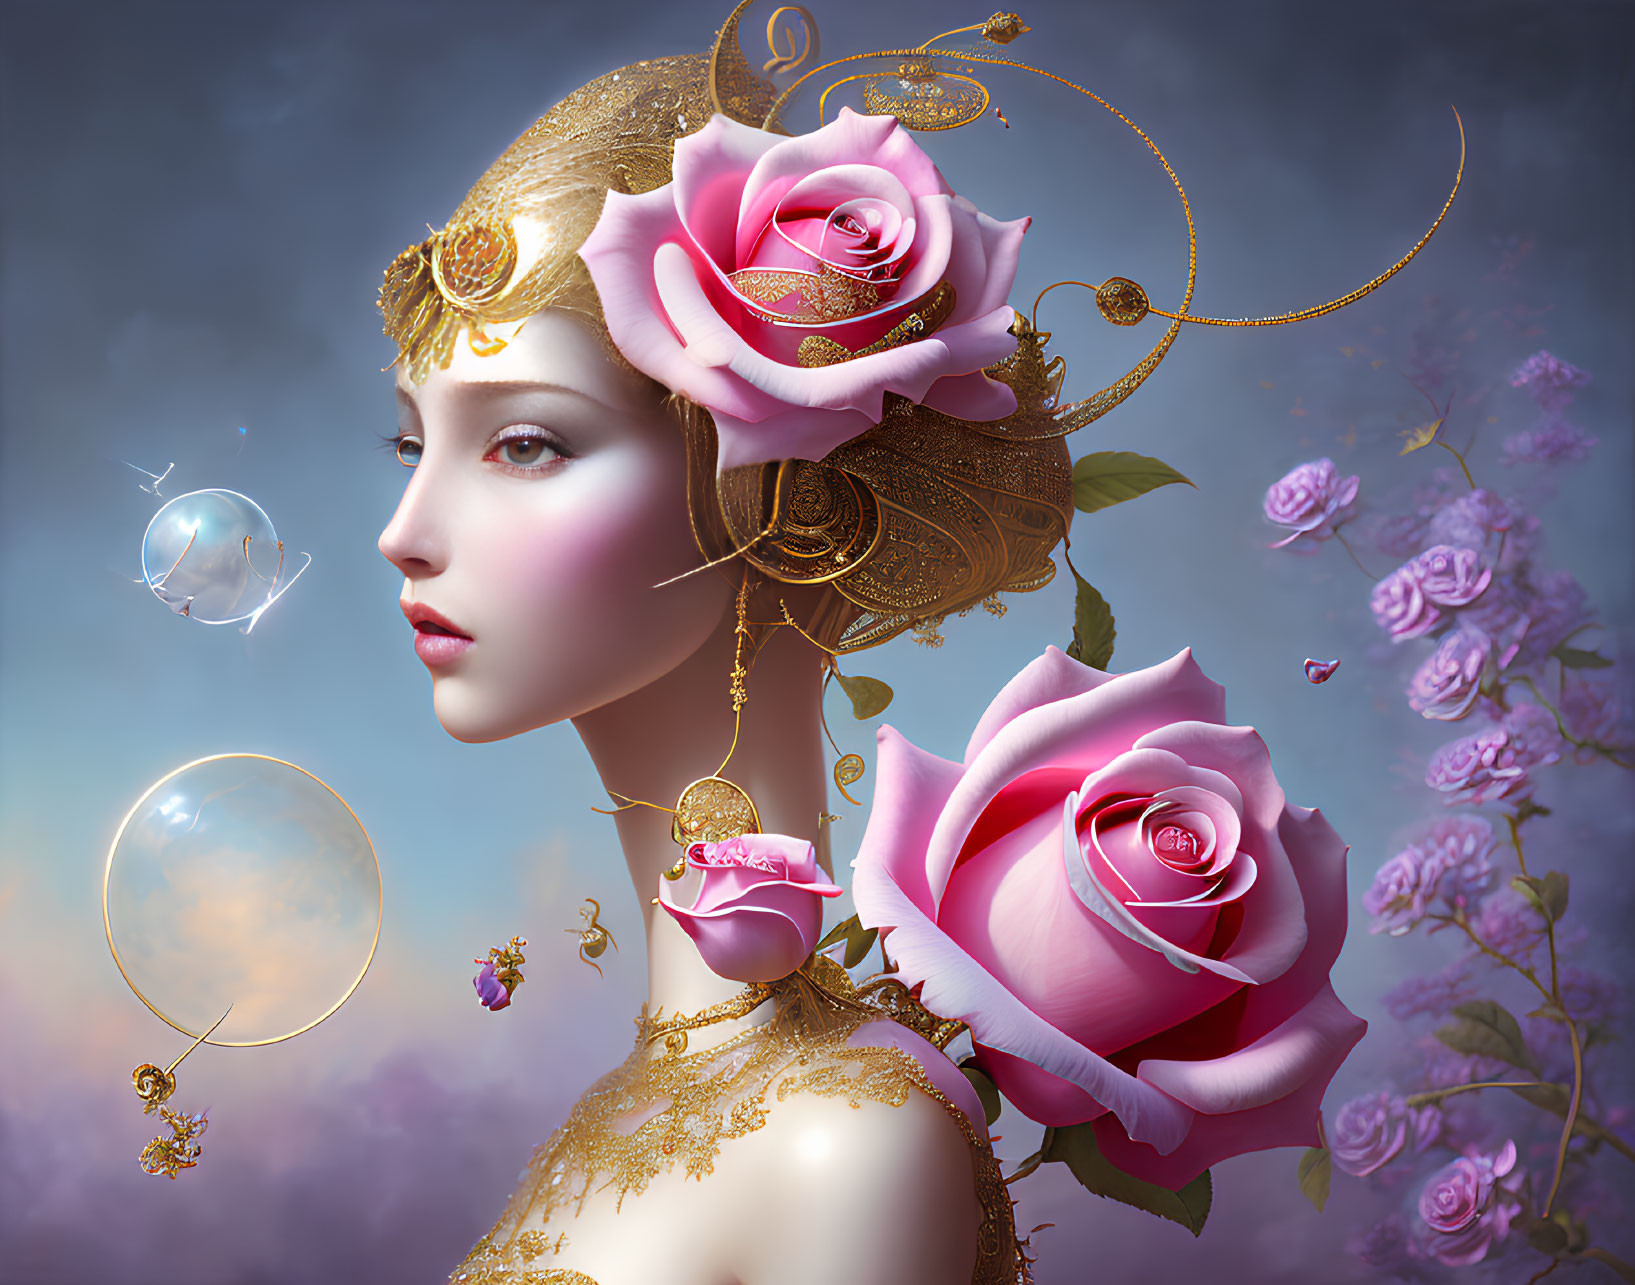 Surreal portrait of woman with gold and rose motifs, bubbles, and floating roses